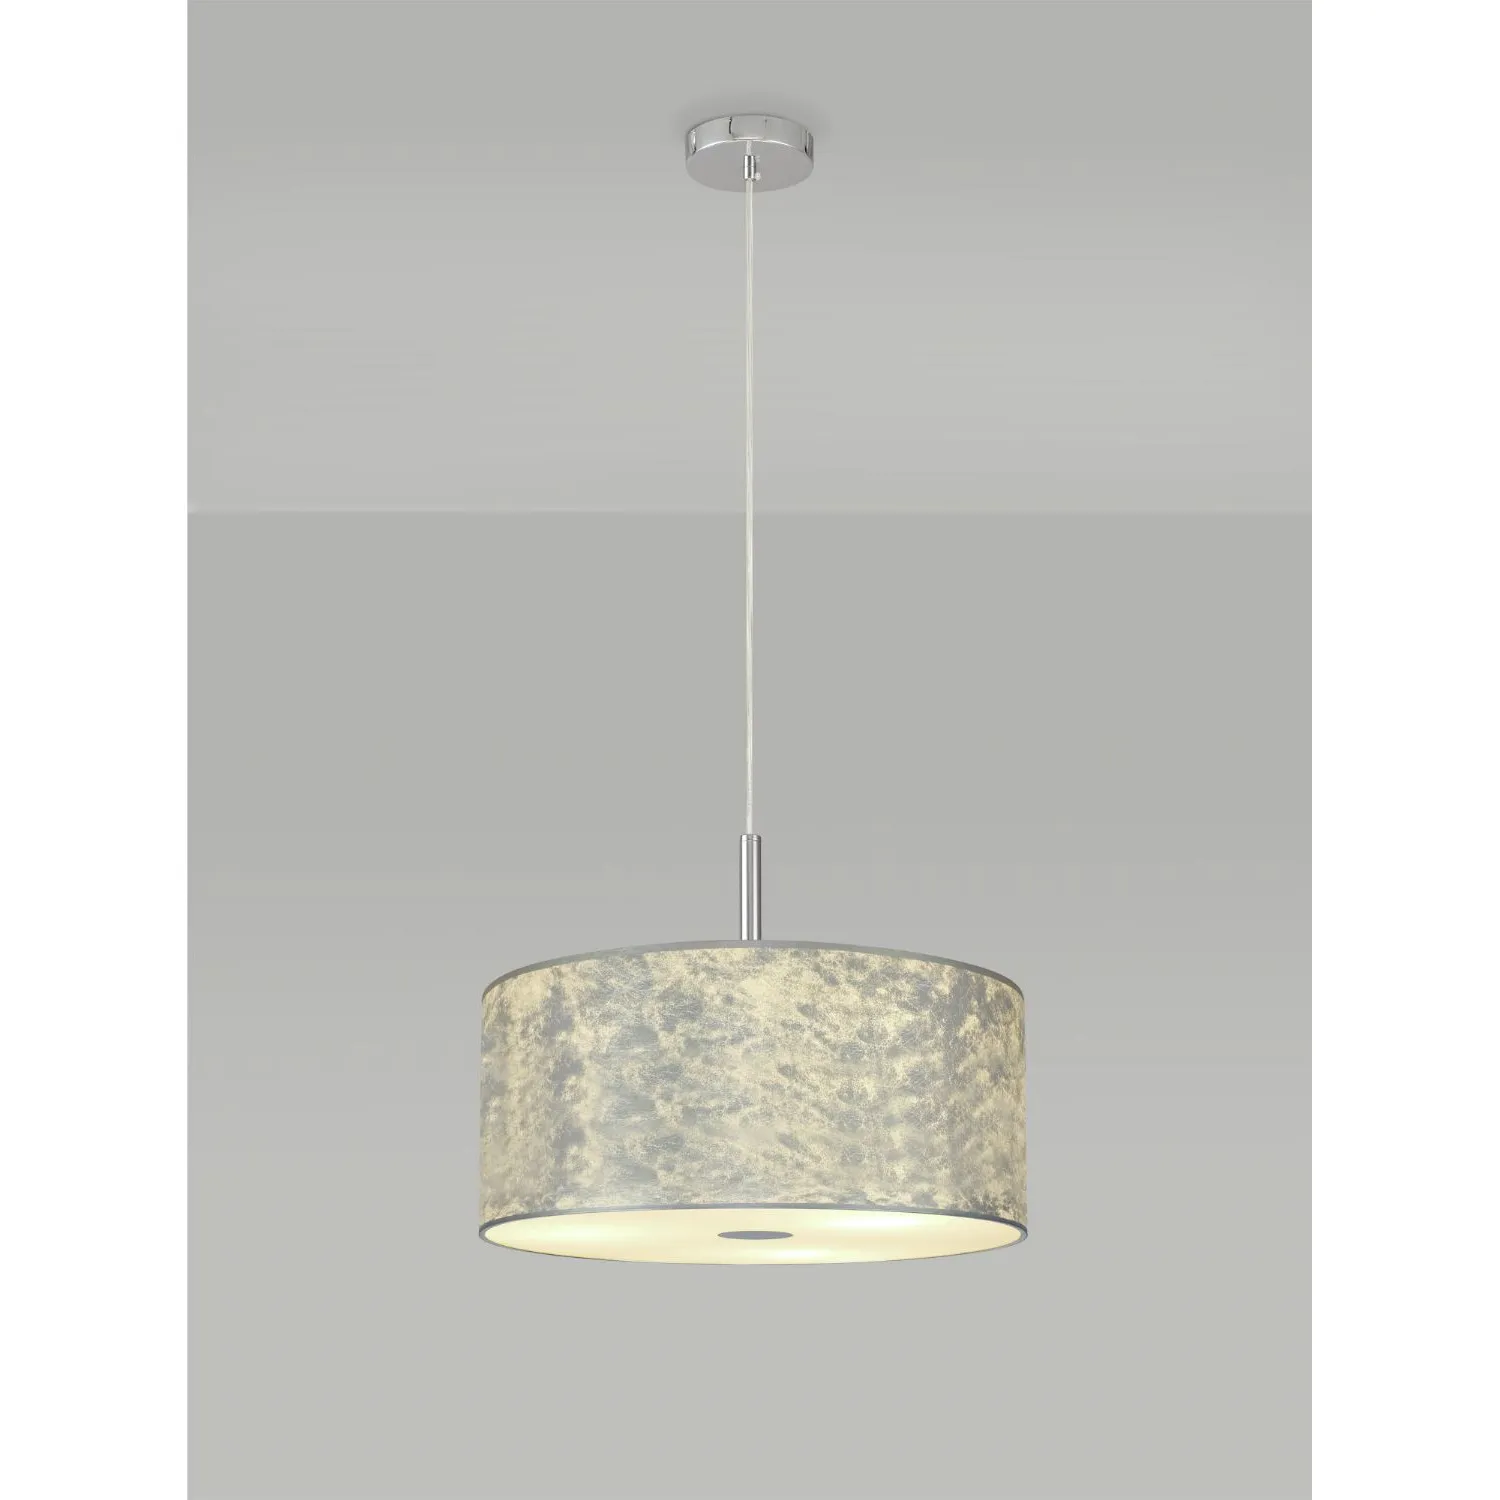 Baymont Polished Chrome 3m 3 Light E27 Single Pendant With 400mm Silver Leaf Shade With Frosted Acrylic Diffuser With Polished Chrome Centre